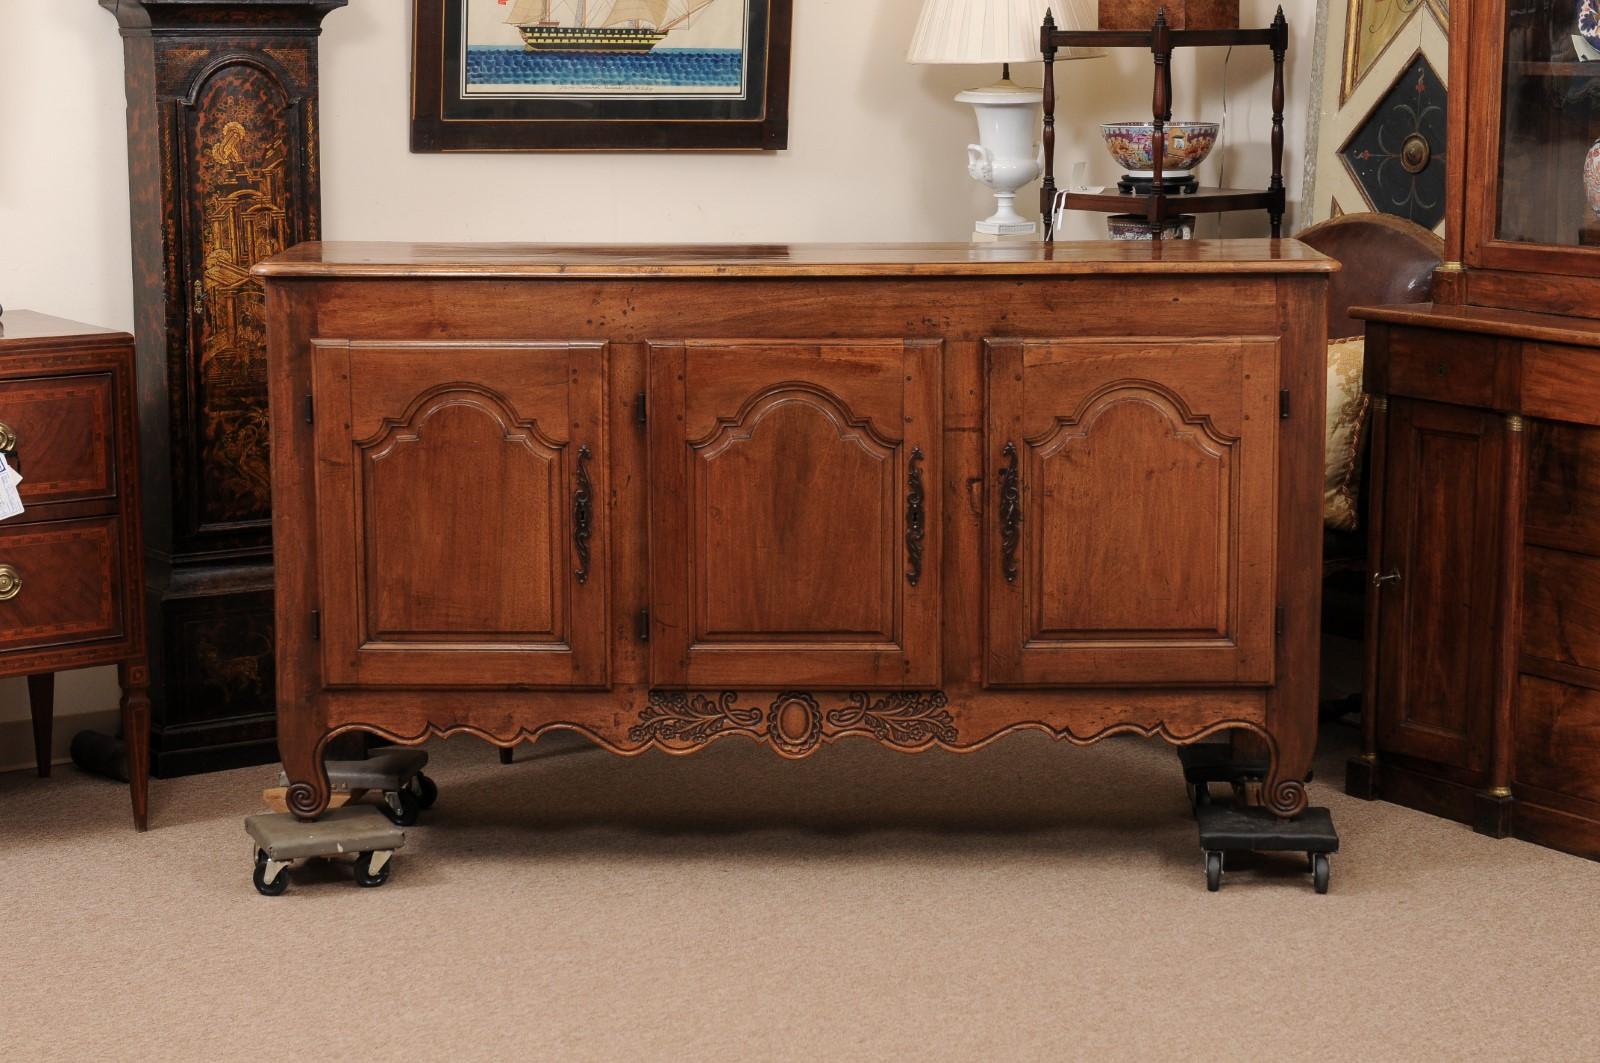  19th Century French Louis XV Style Walnut Enfilade with 3 Cabinet Doors  7